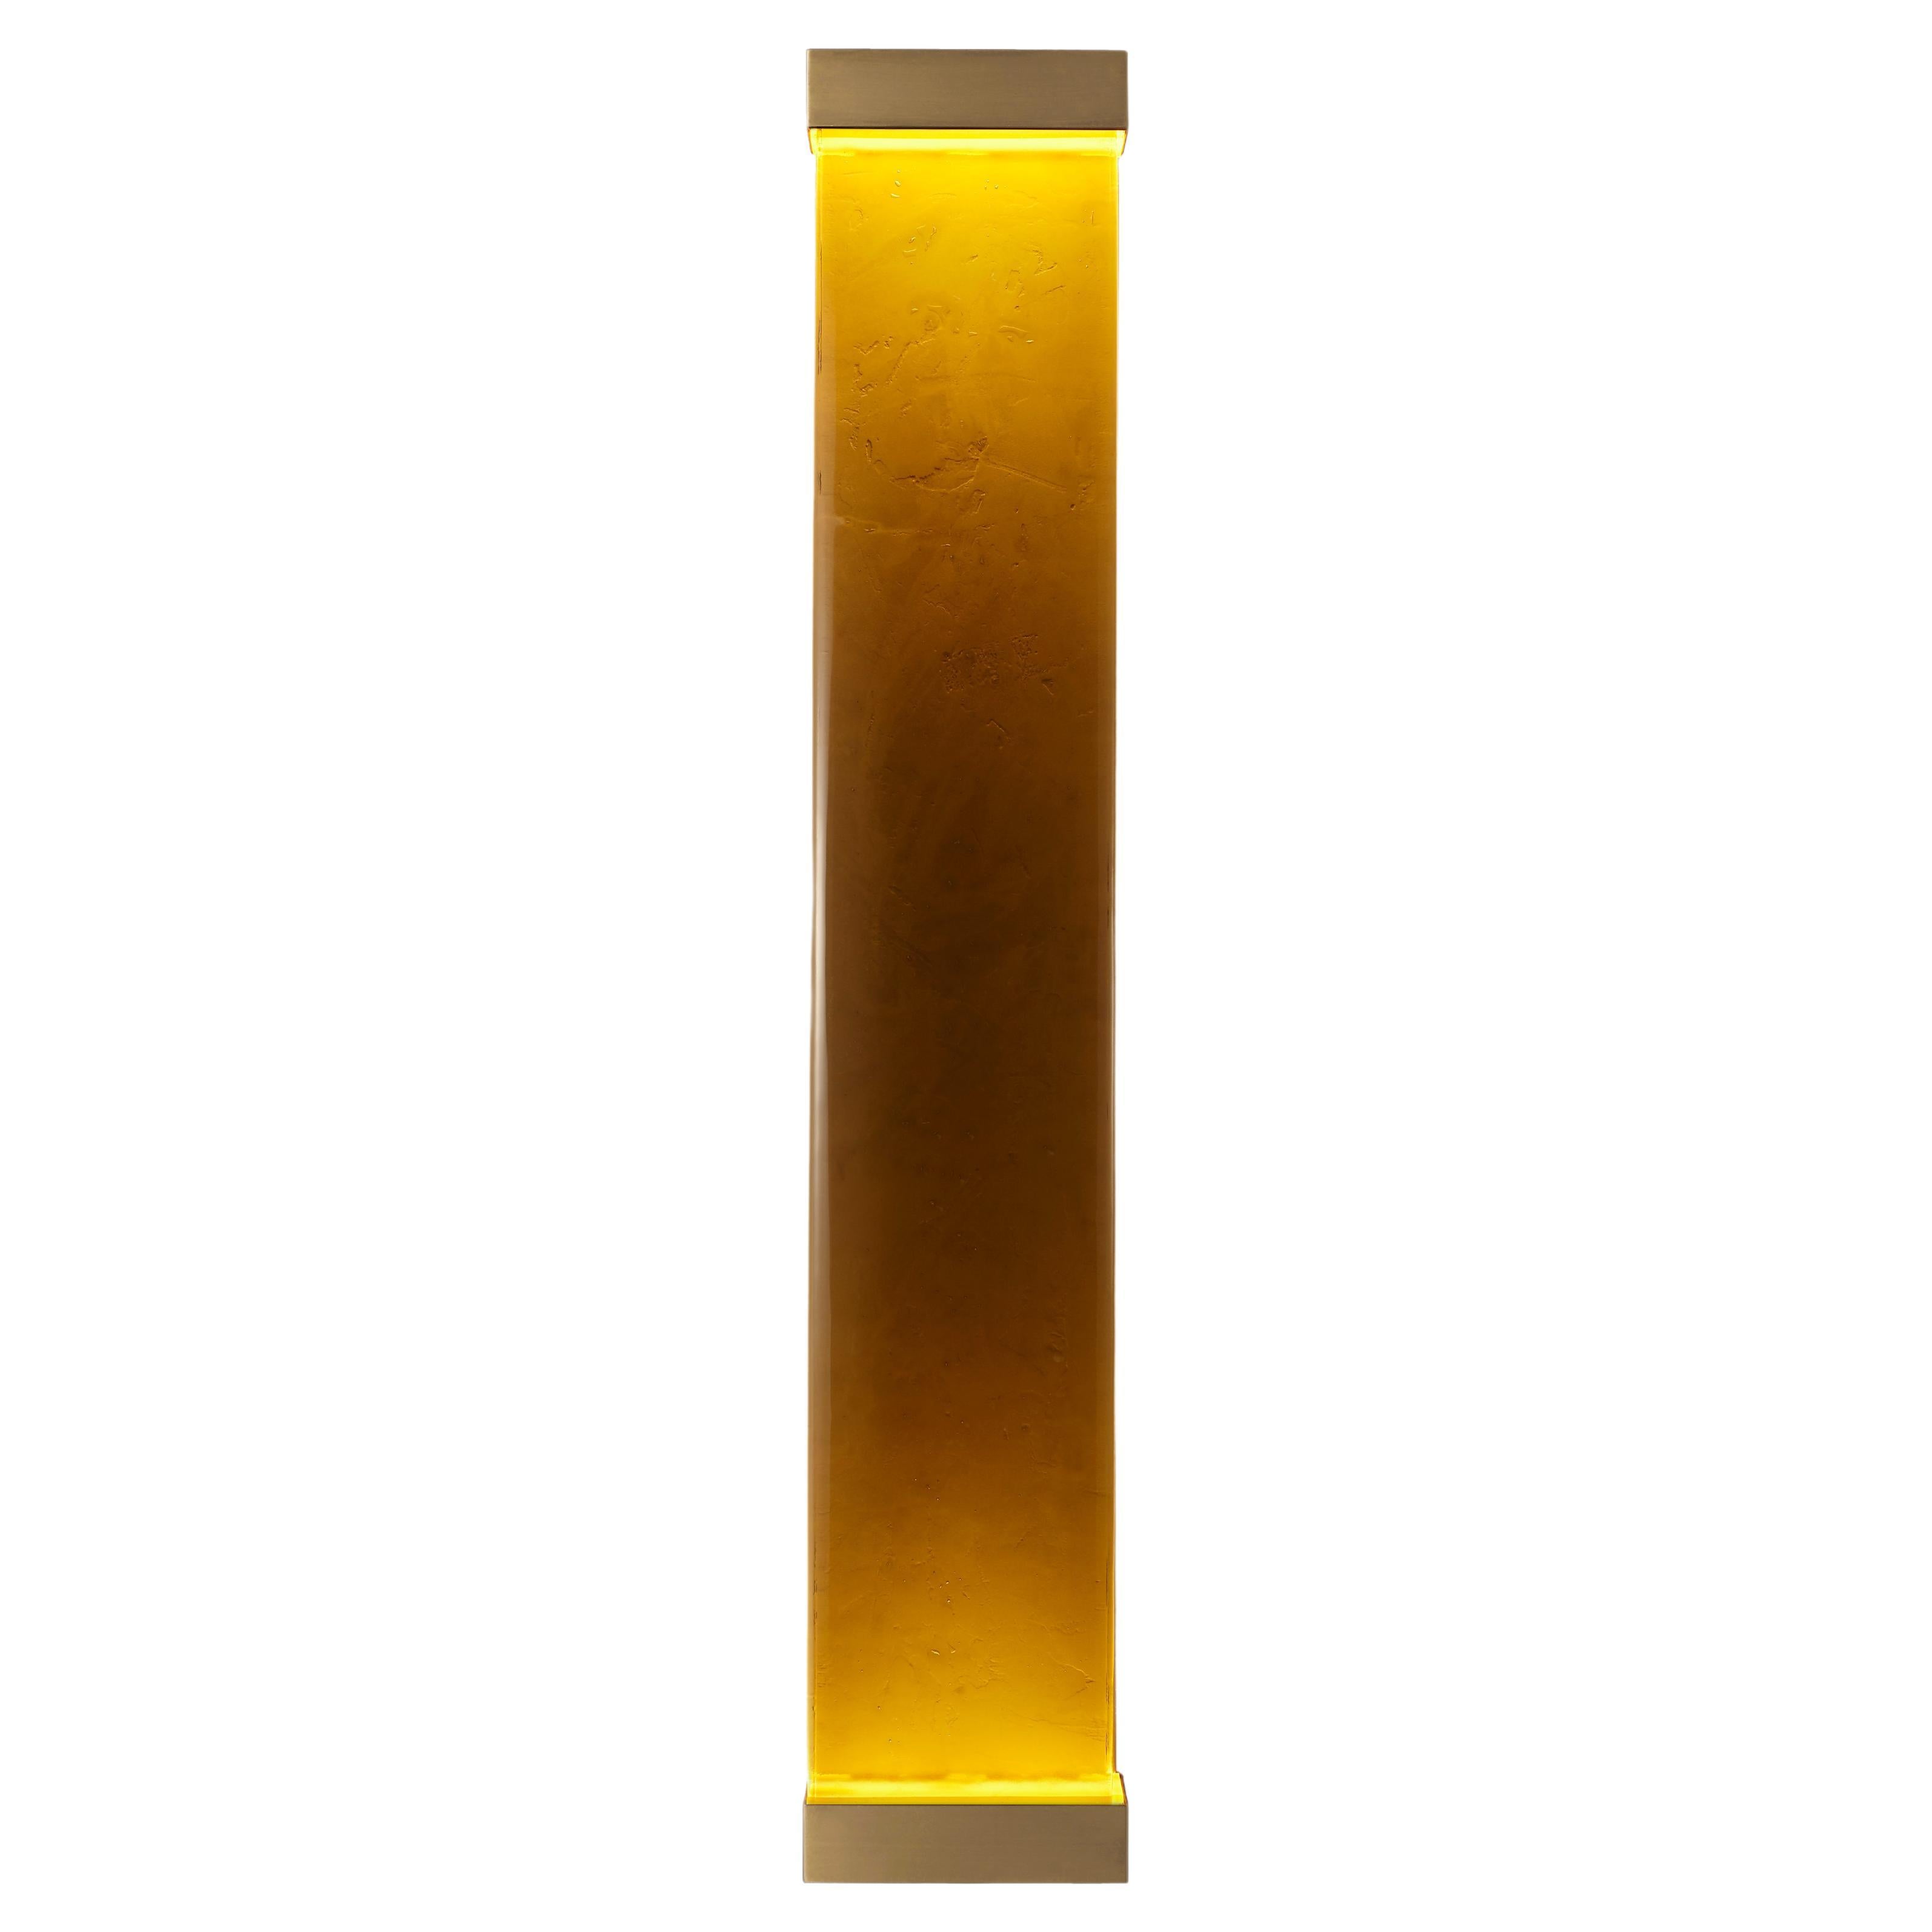 Jud Wall Lamps Cotto by Draga&Aurel Resin, 21st Century Glass Resin Brass